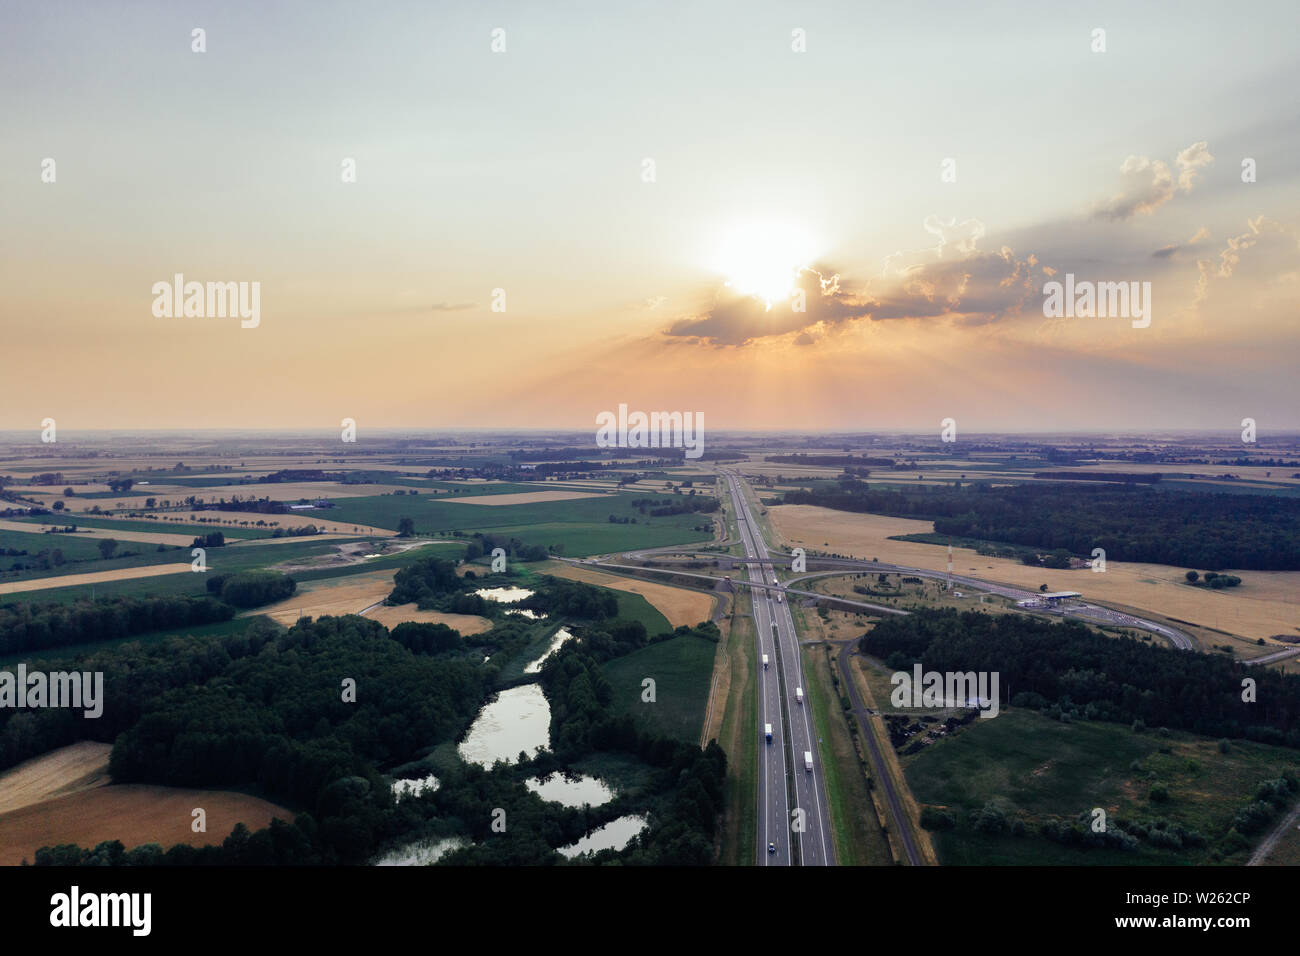 Aerial photography of a sunset over the A2 highway in Poland. Stock Photo